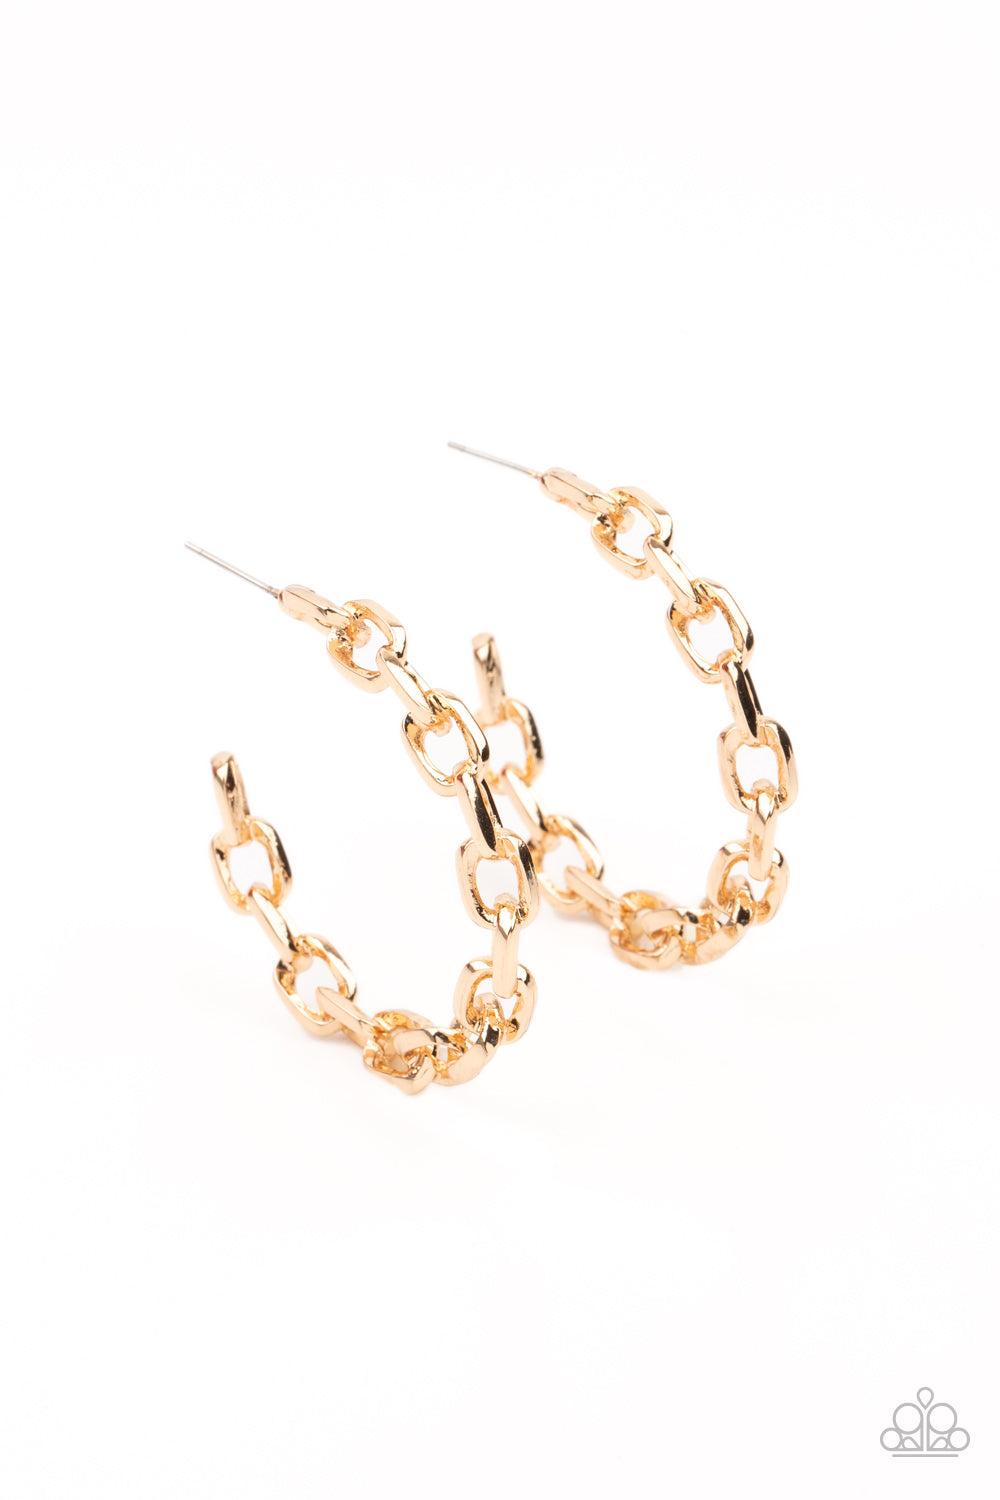 Stronger Together -  Gold Hoops - Paparazzi Accessories - Paparazzi Accessories 